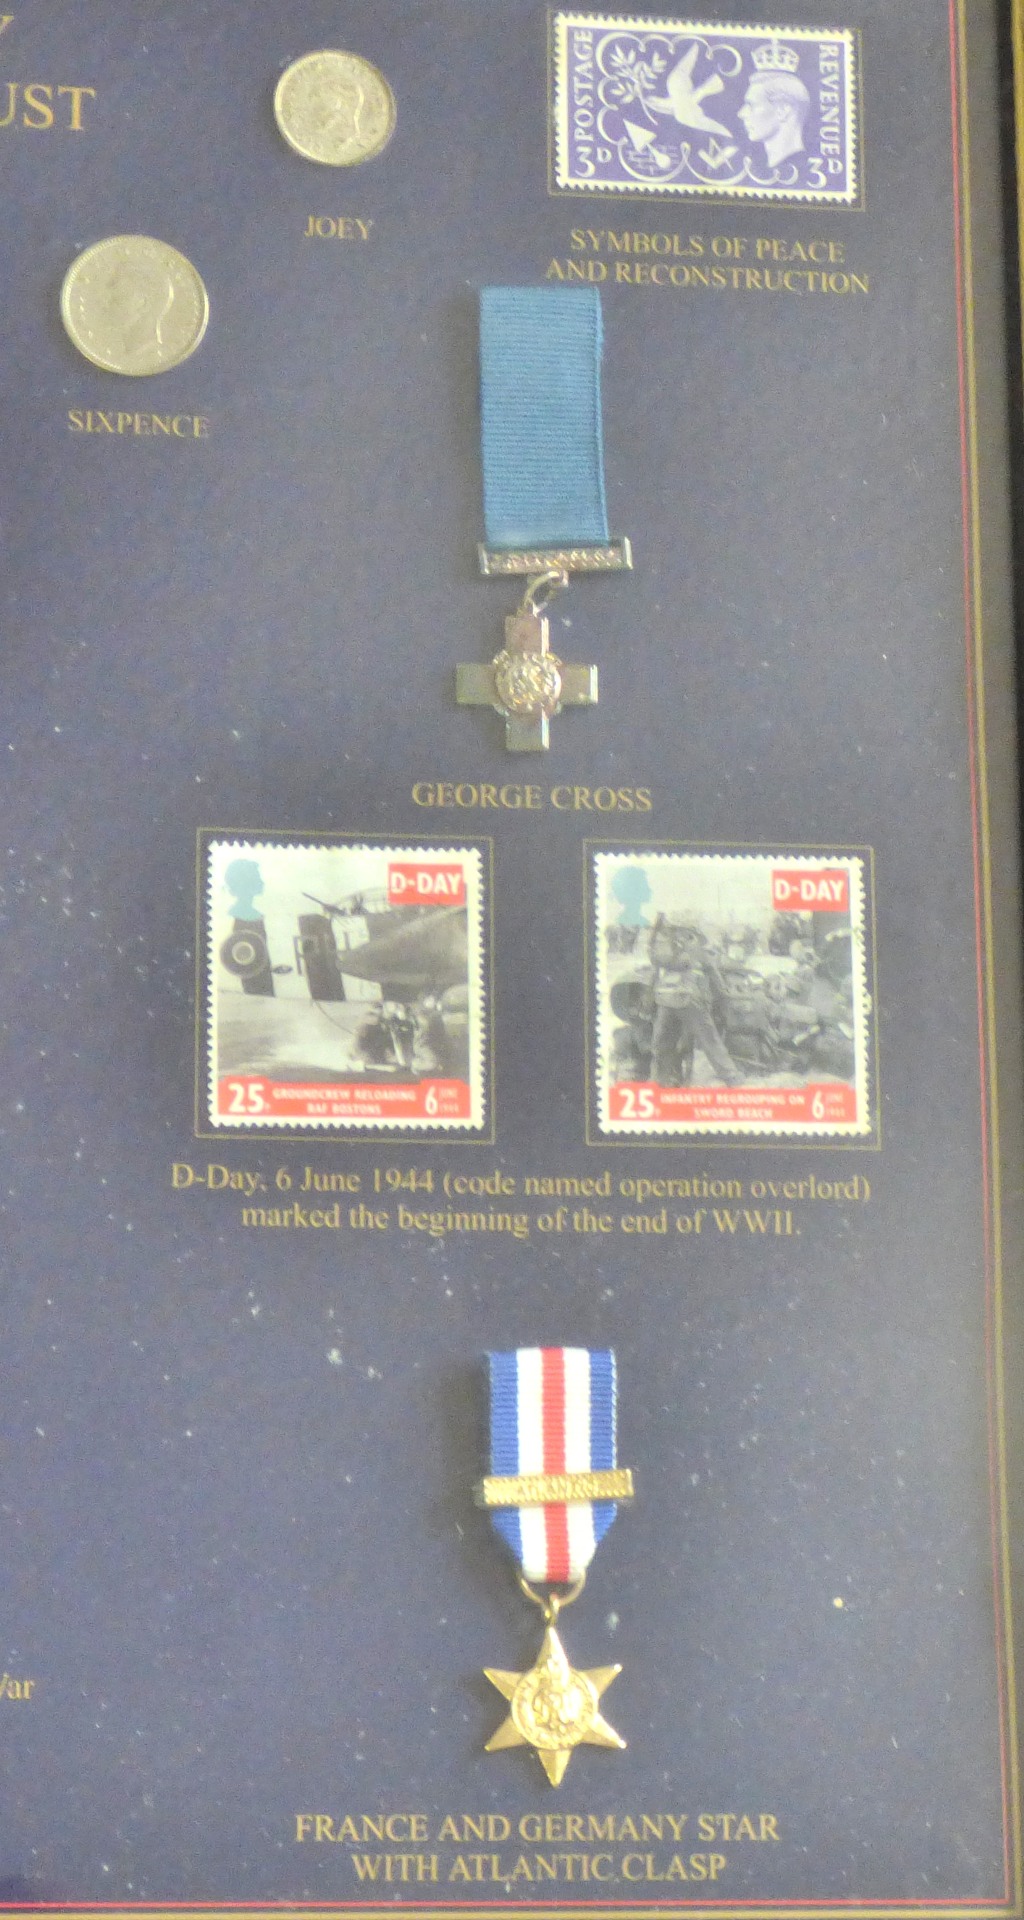 Framed - Second World War Victory - with coins and mini medals + stamps, very good condition - Image 2 of 4